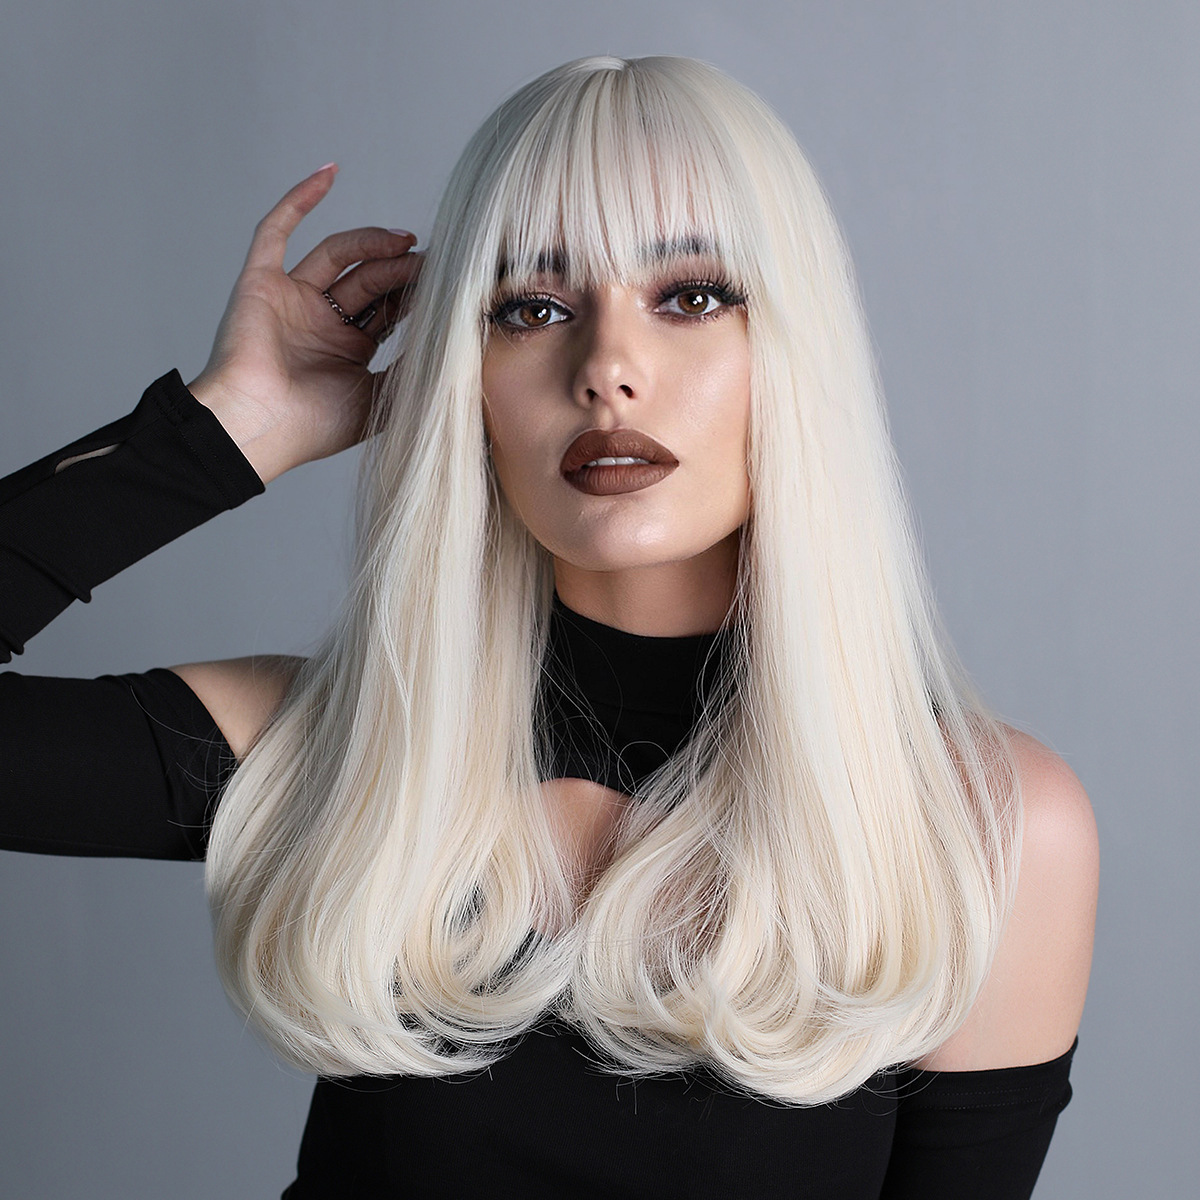 A stylish platinum blonde long curly wig included in a fashionable synthetic wig set for women, ideal for various occasions